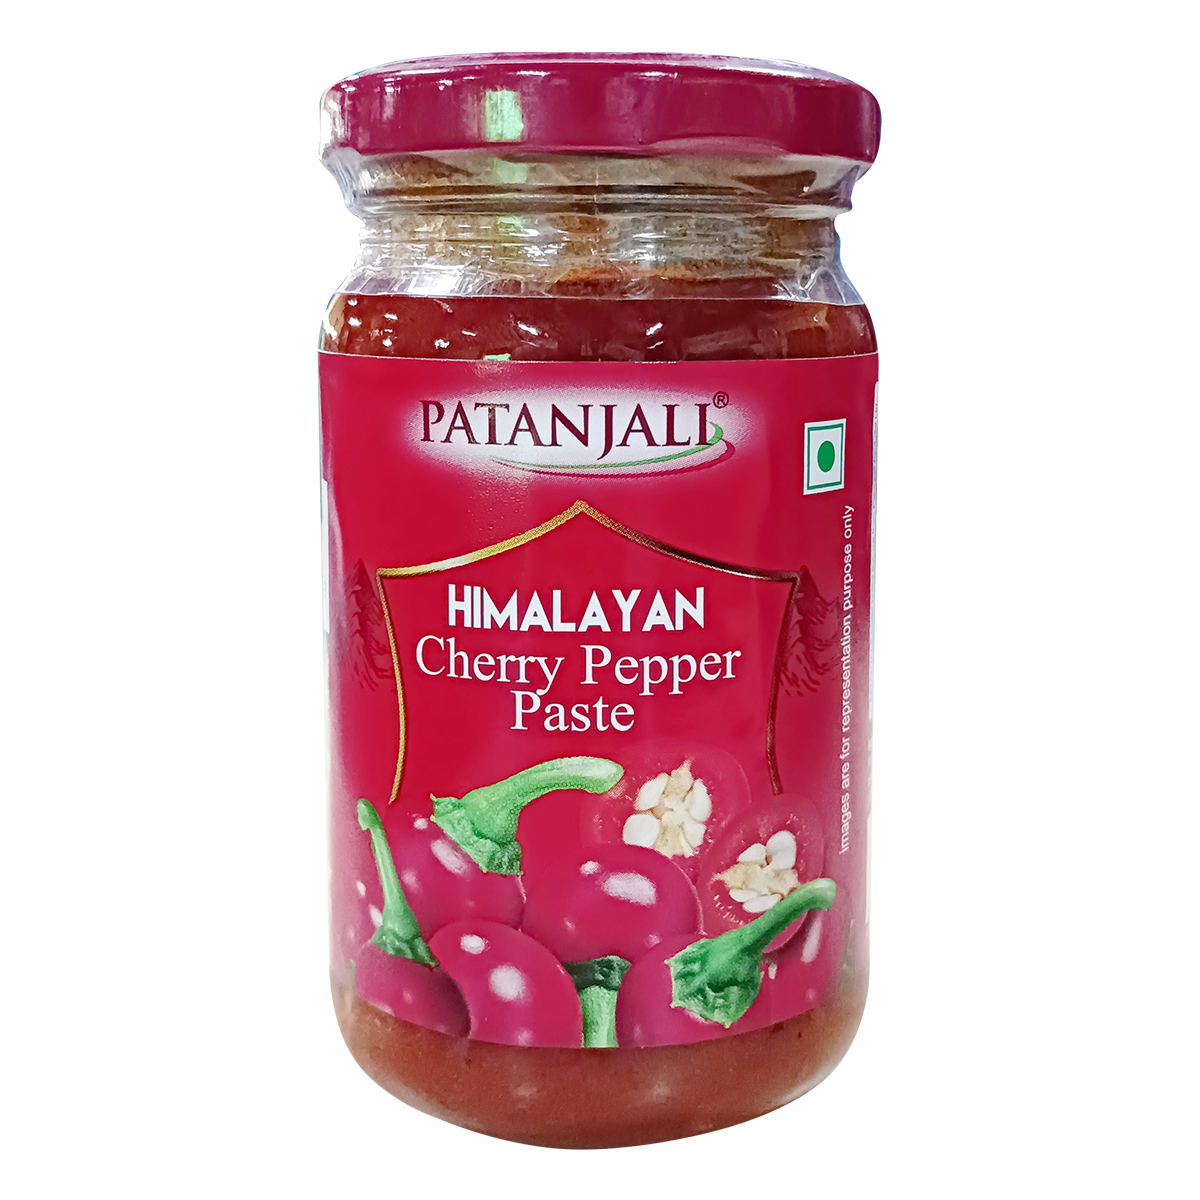 Himalayan Cherry Pepper Paste